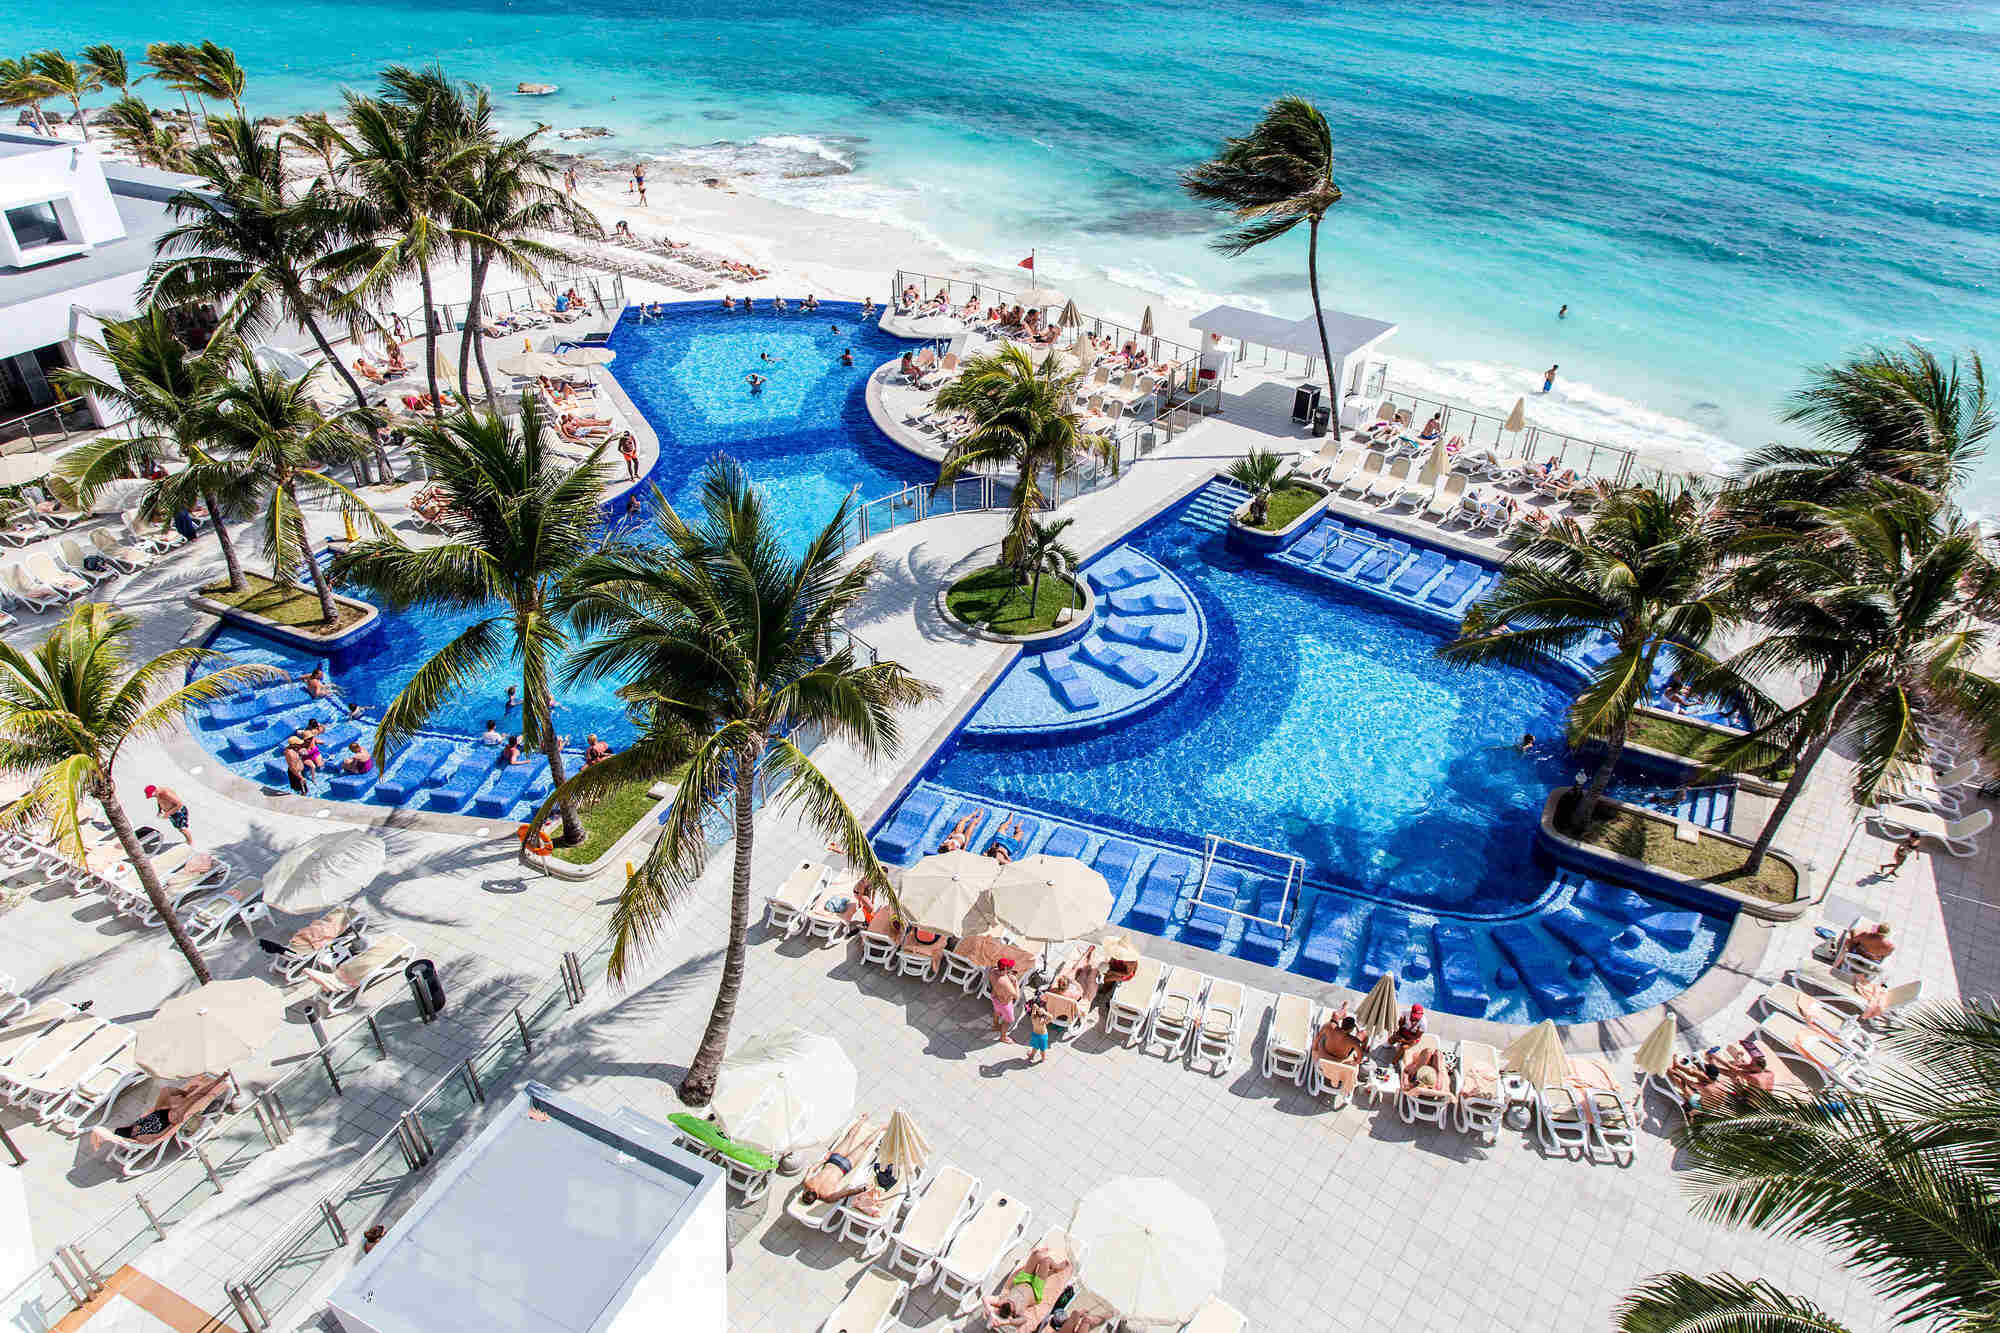 Spring Break In Cancun: The Best All-Inclusive Hotels And Things To Do